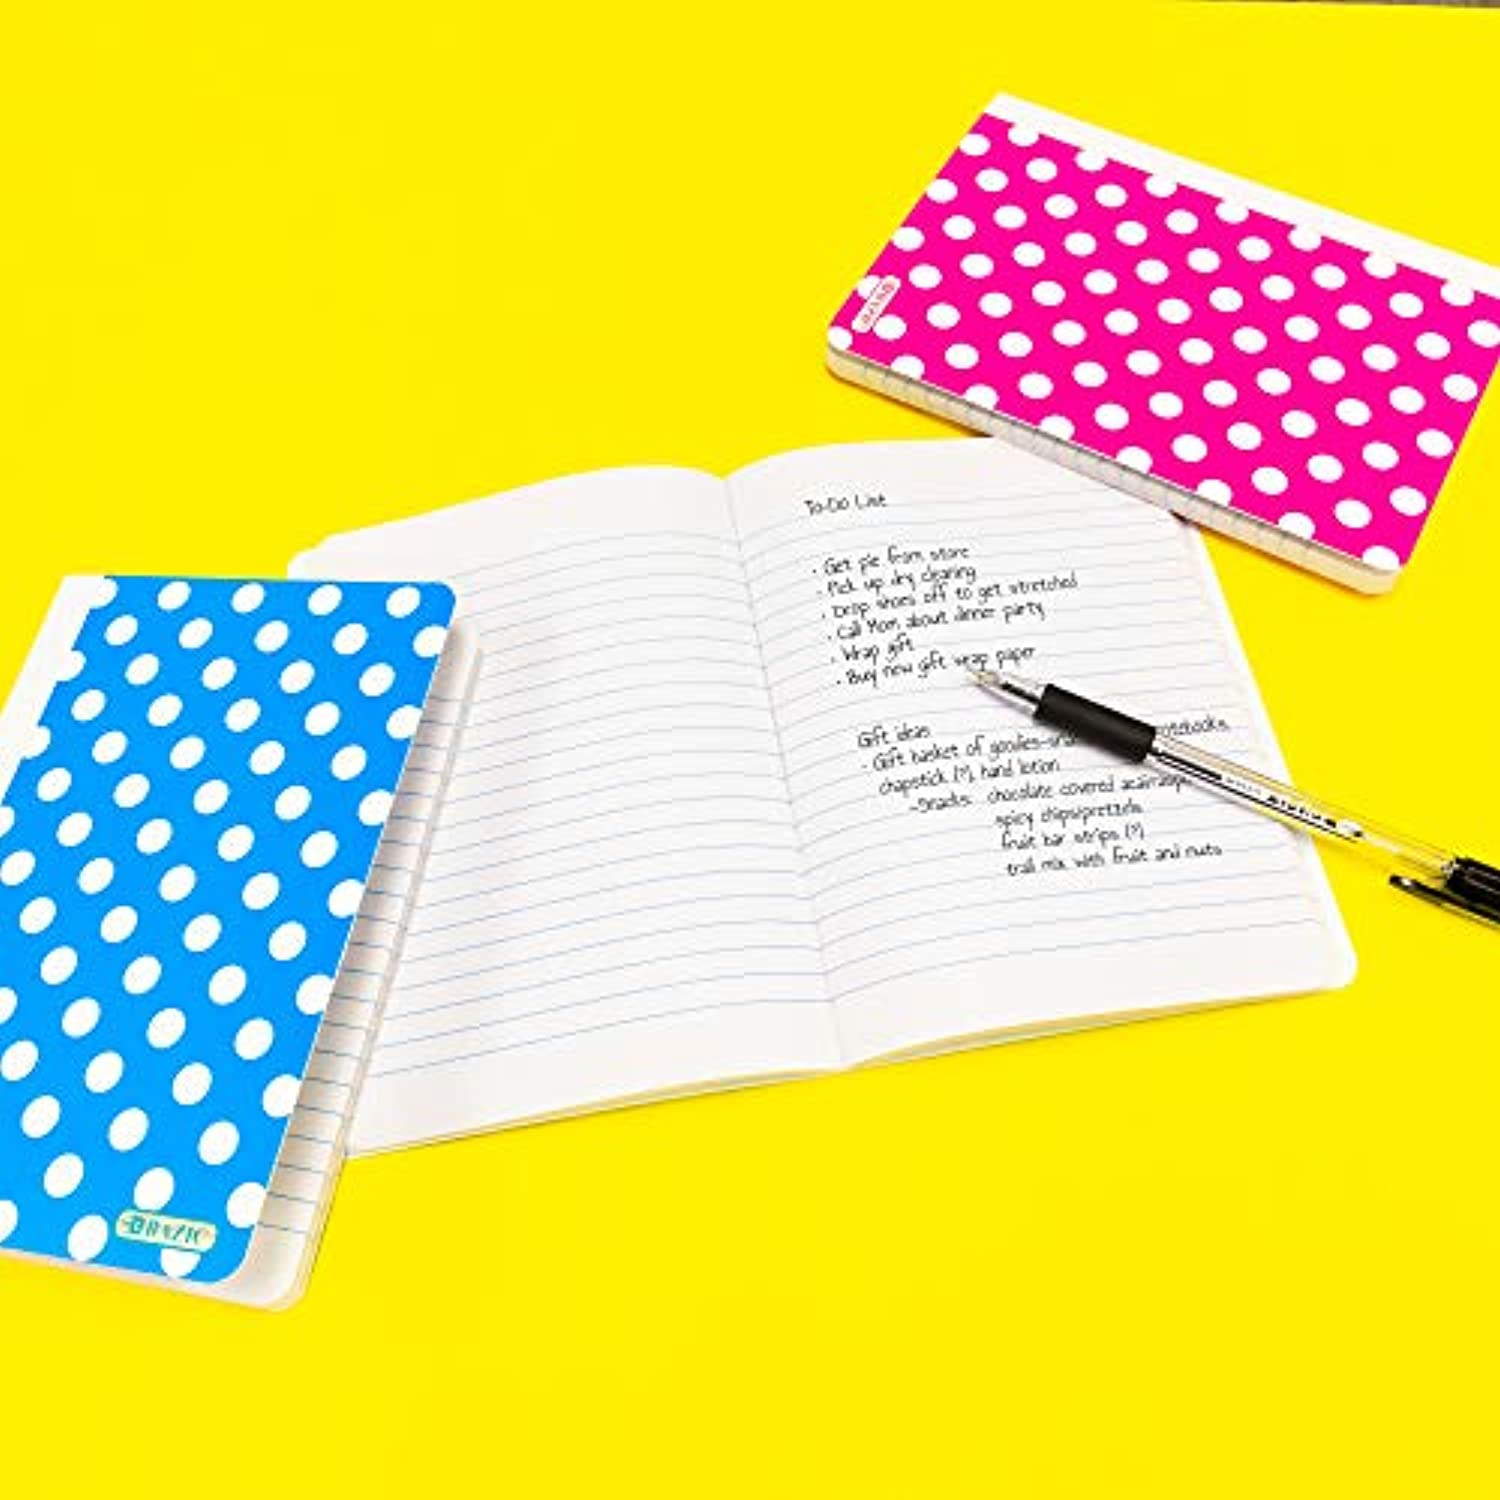 BAZIC 80 Sheets 5" x 7" Polka Dot Poly Cover College Ruled Personal Composition Book, Comp Books Writing Journal Notebook w/Lined Paper, for School Office Student Schedule, 6-Pack.